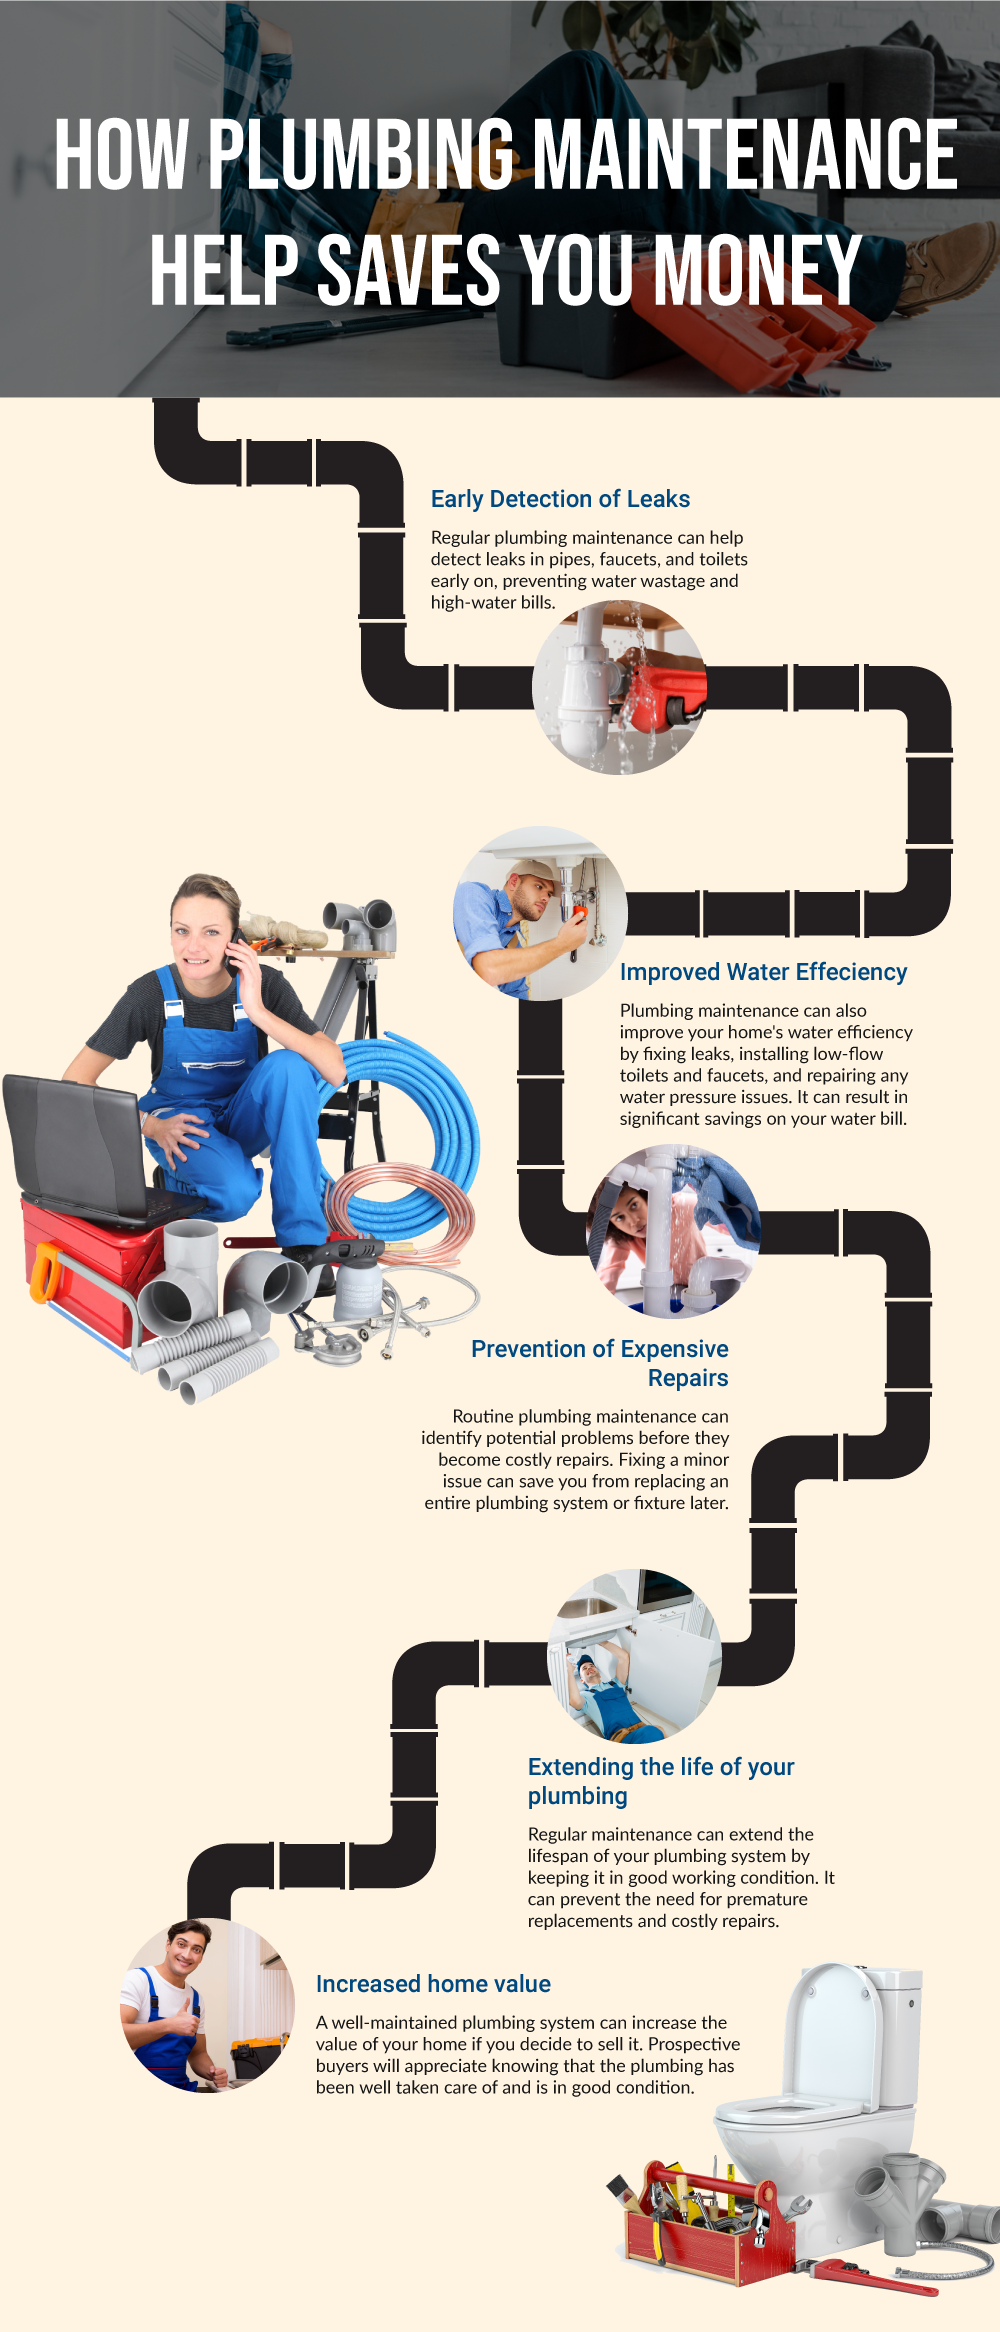 How Plumbing Maintenance Help Saves You Money in Bay Area Infographic